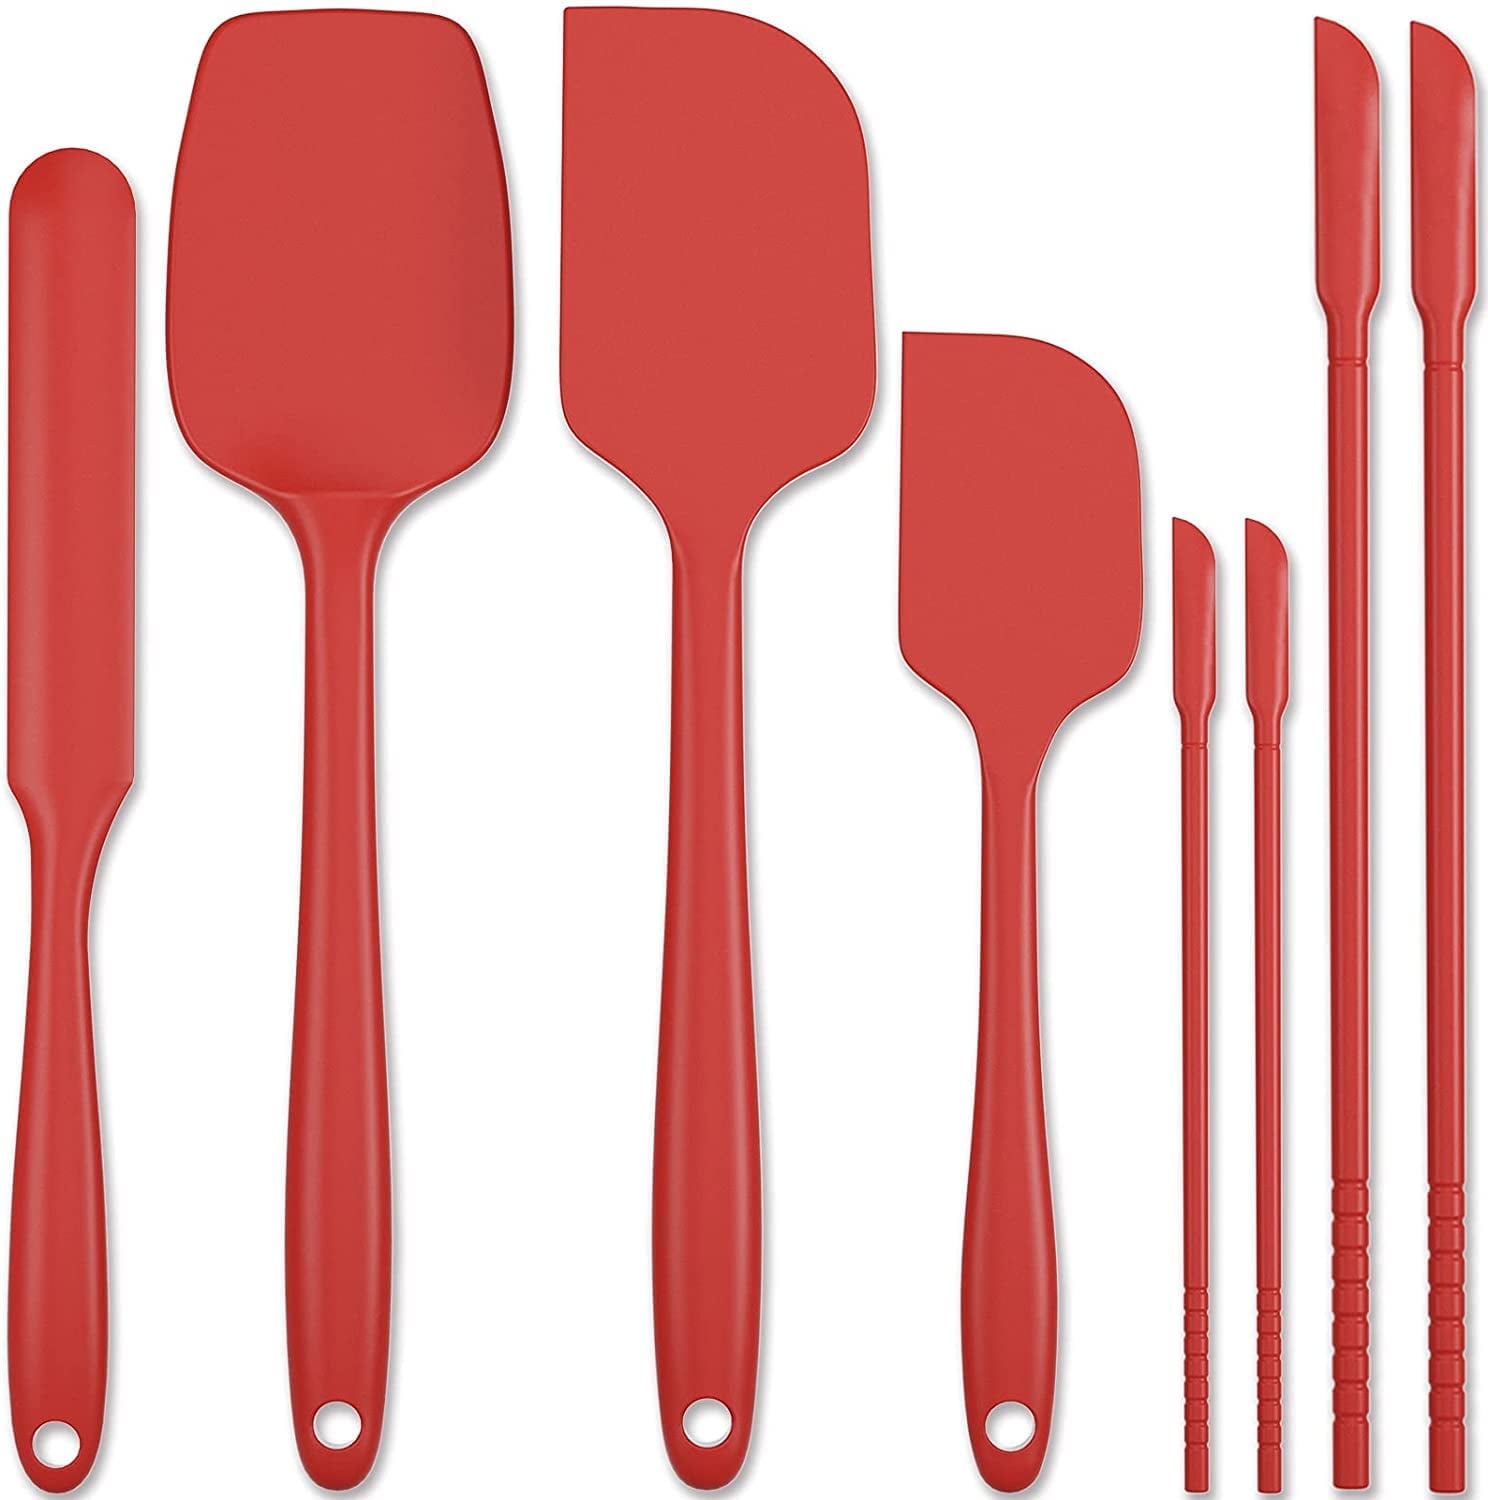 StarPack Basics Small Silicone Spatula (8.5), High Heat Resistant to  480°F, Hygienic One Piece Design, Non Stick Rubber Cooking Utensil